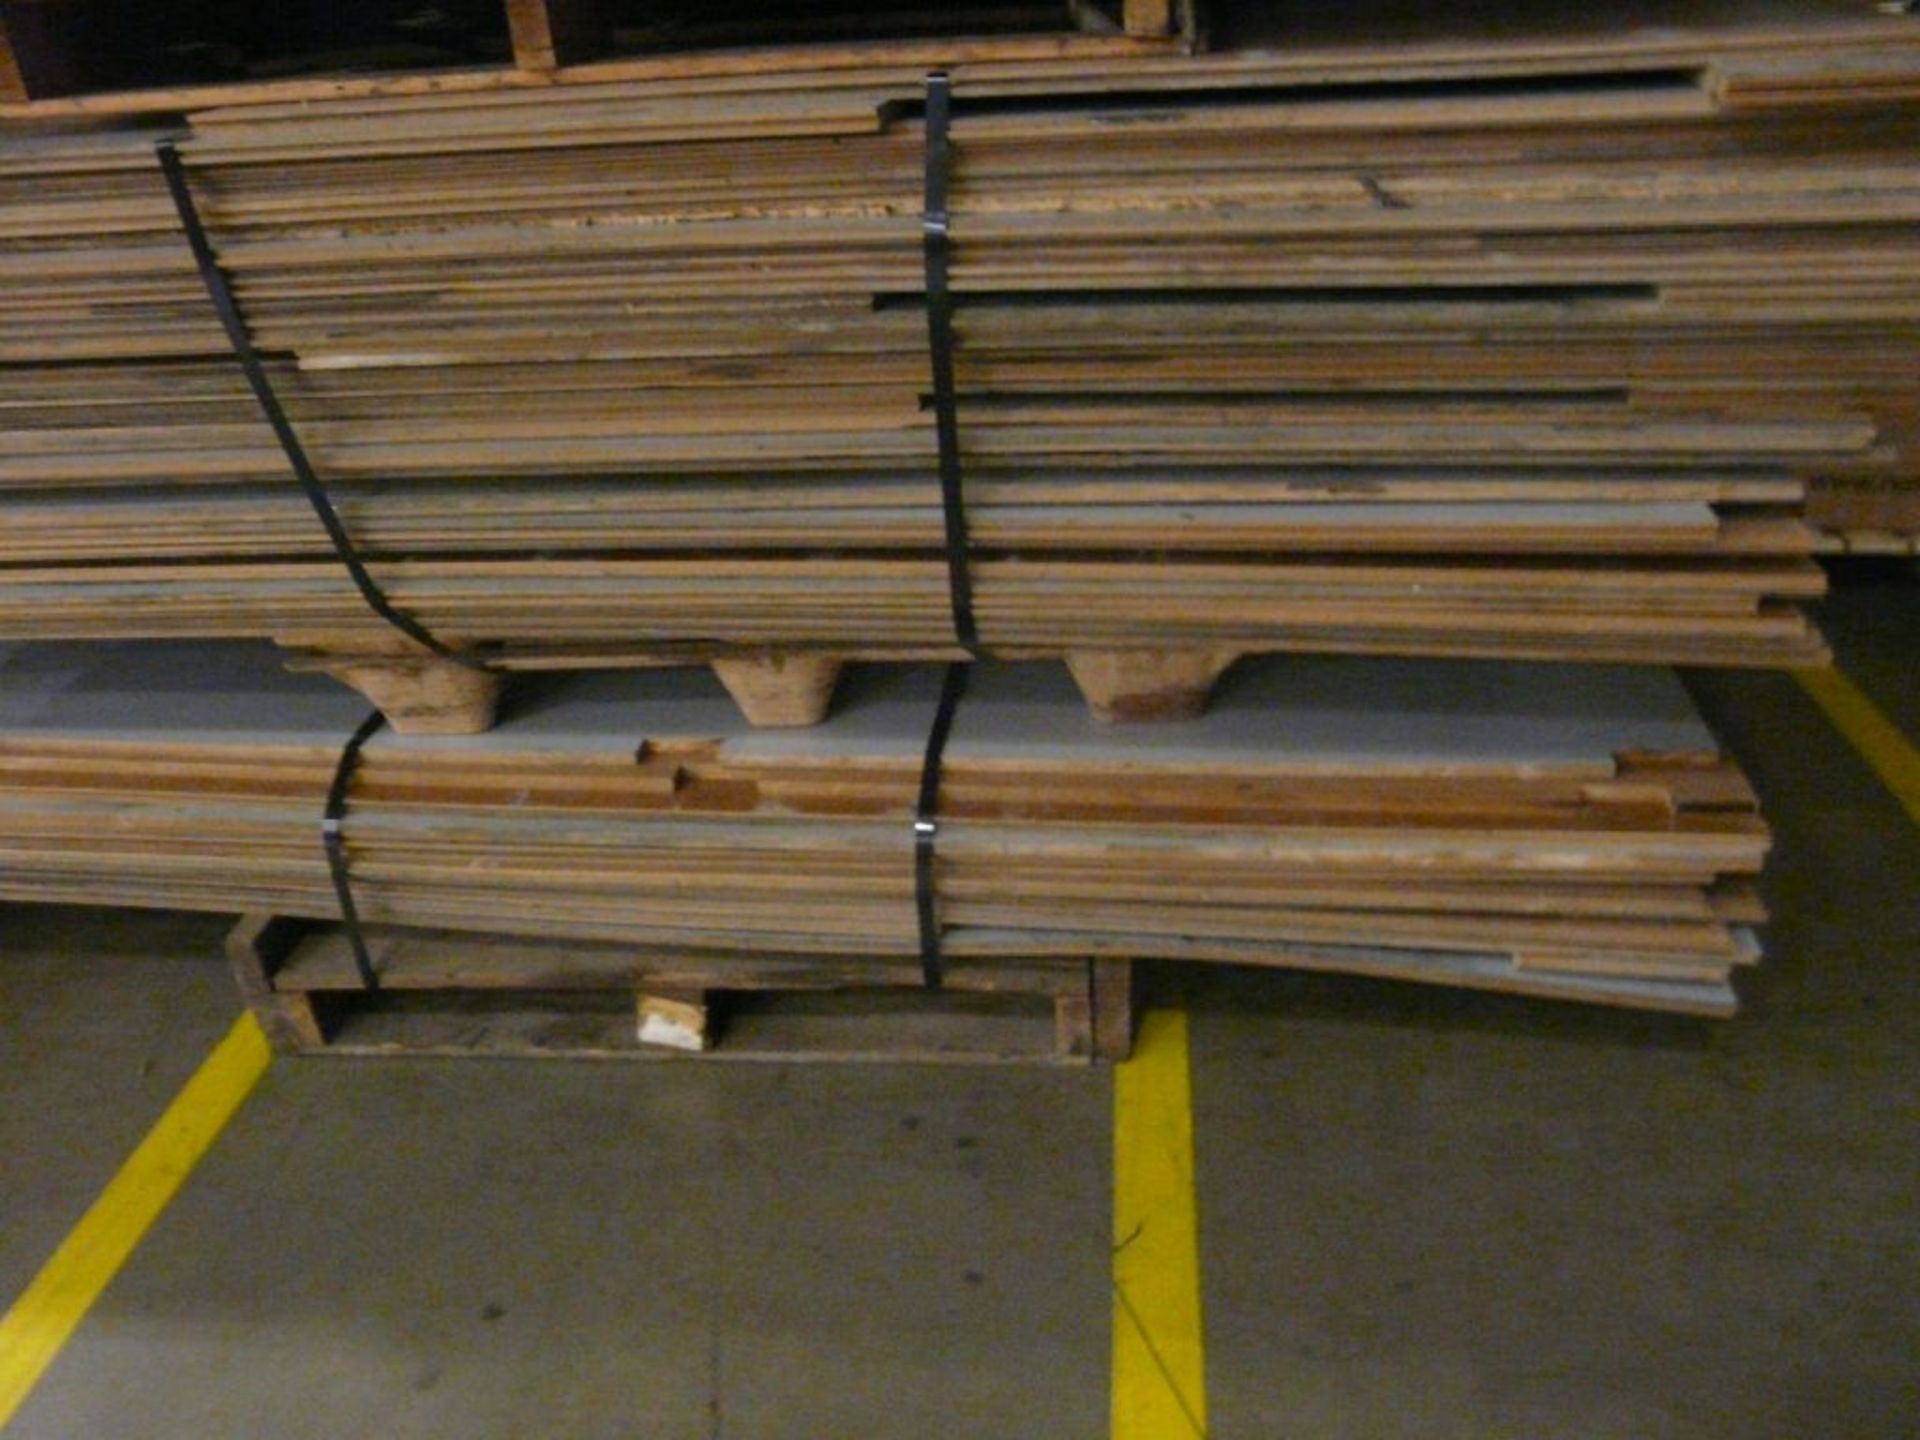 Lot of (1) Bundles of (30) Wood Floor Boards - 101" x 48"W; Tag: 223817 - $30 Lot Loading Fee - Image 3 of 3